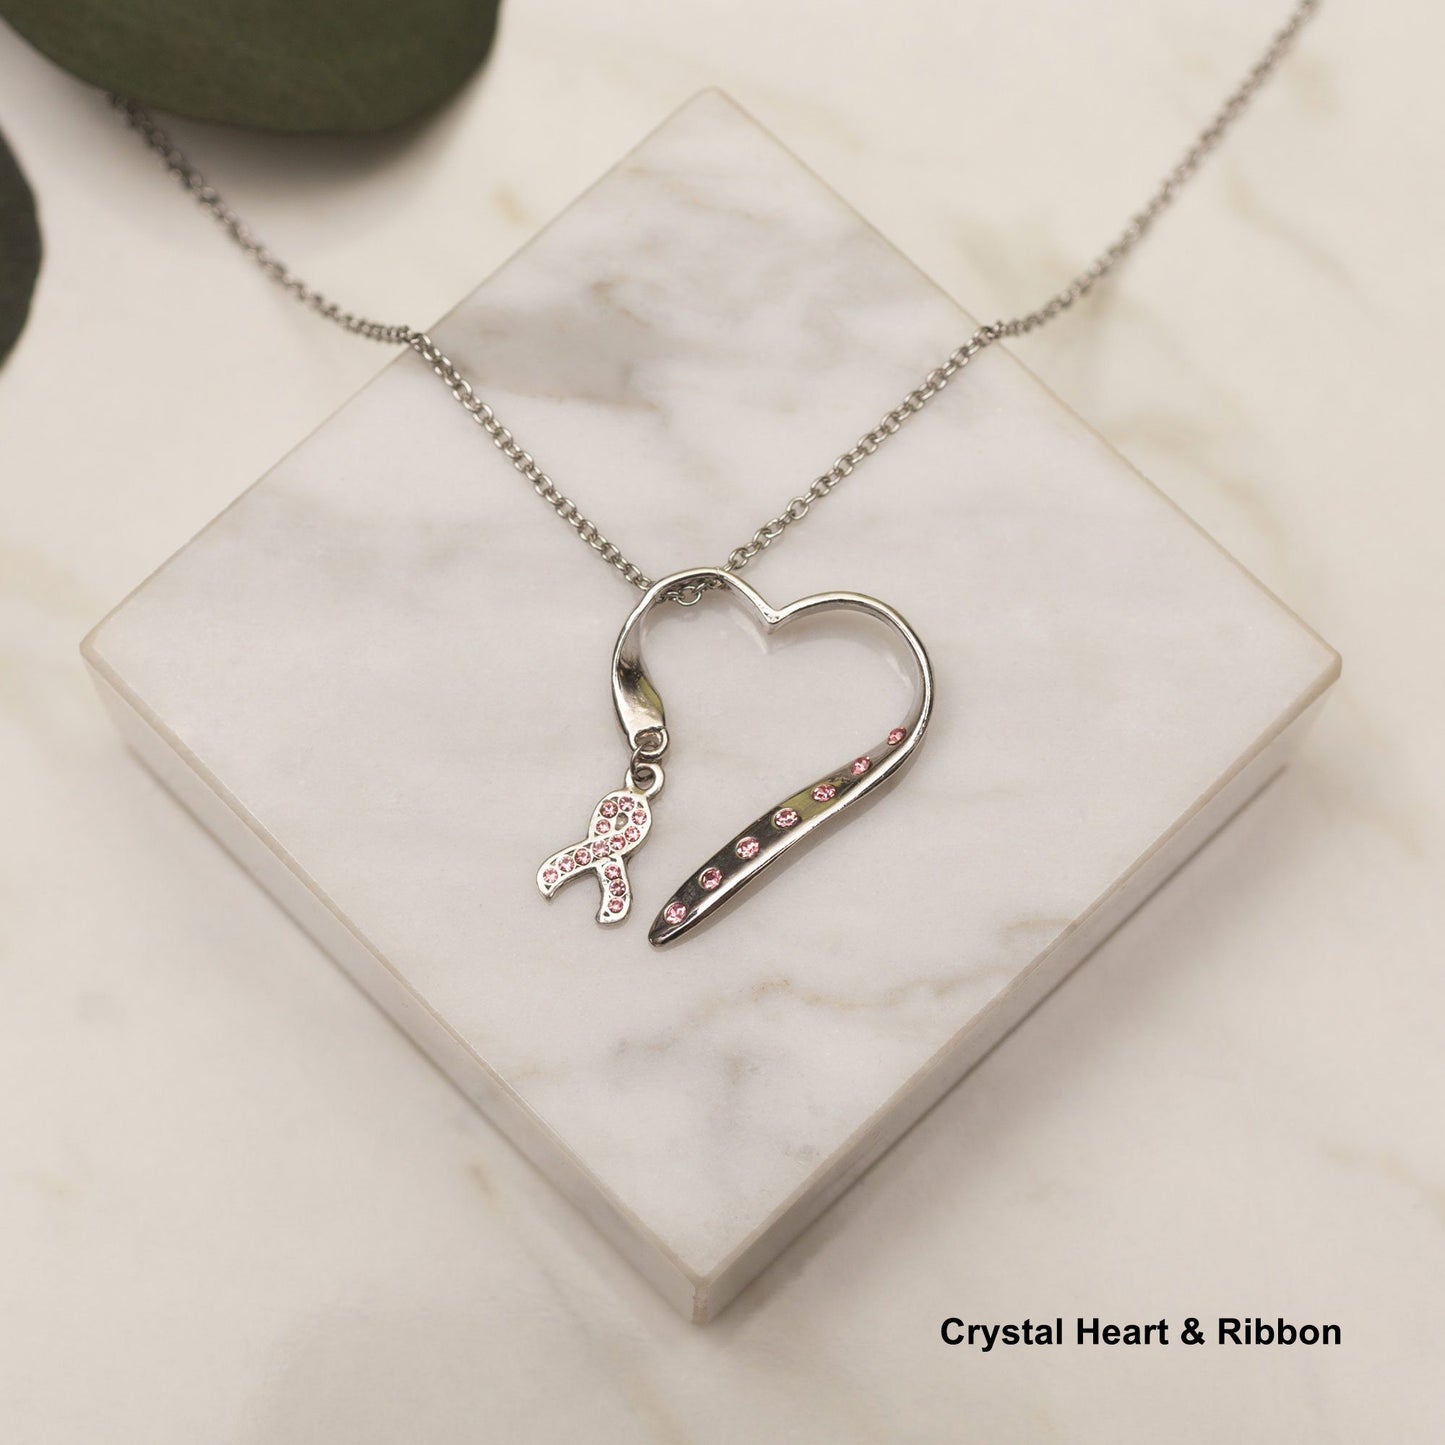 Crystal Heart & Ribbon Pewter Necklace!